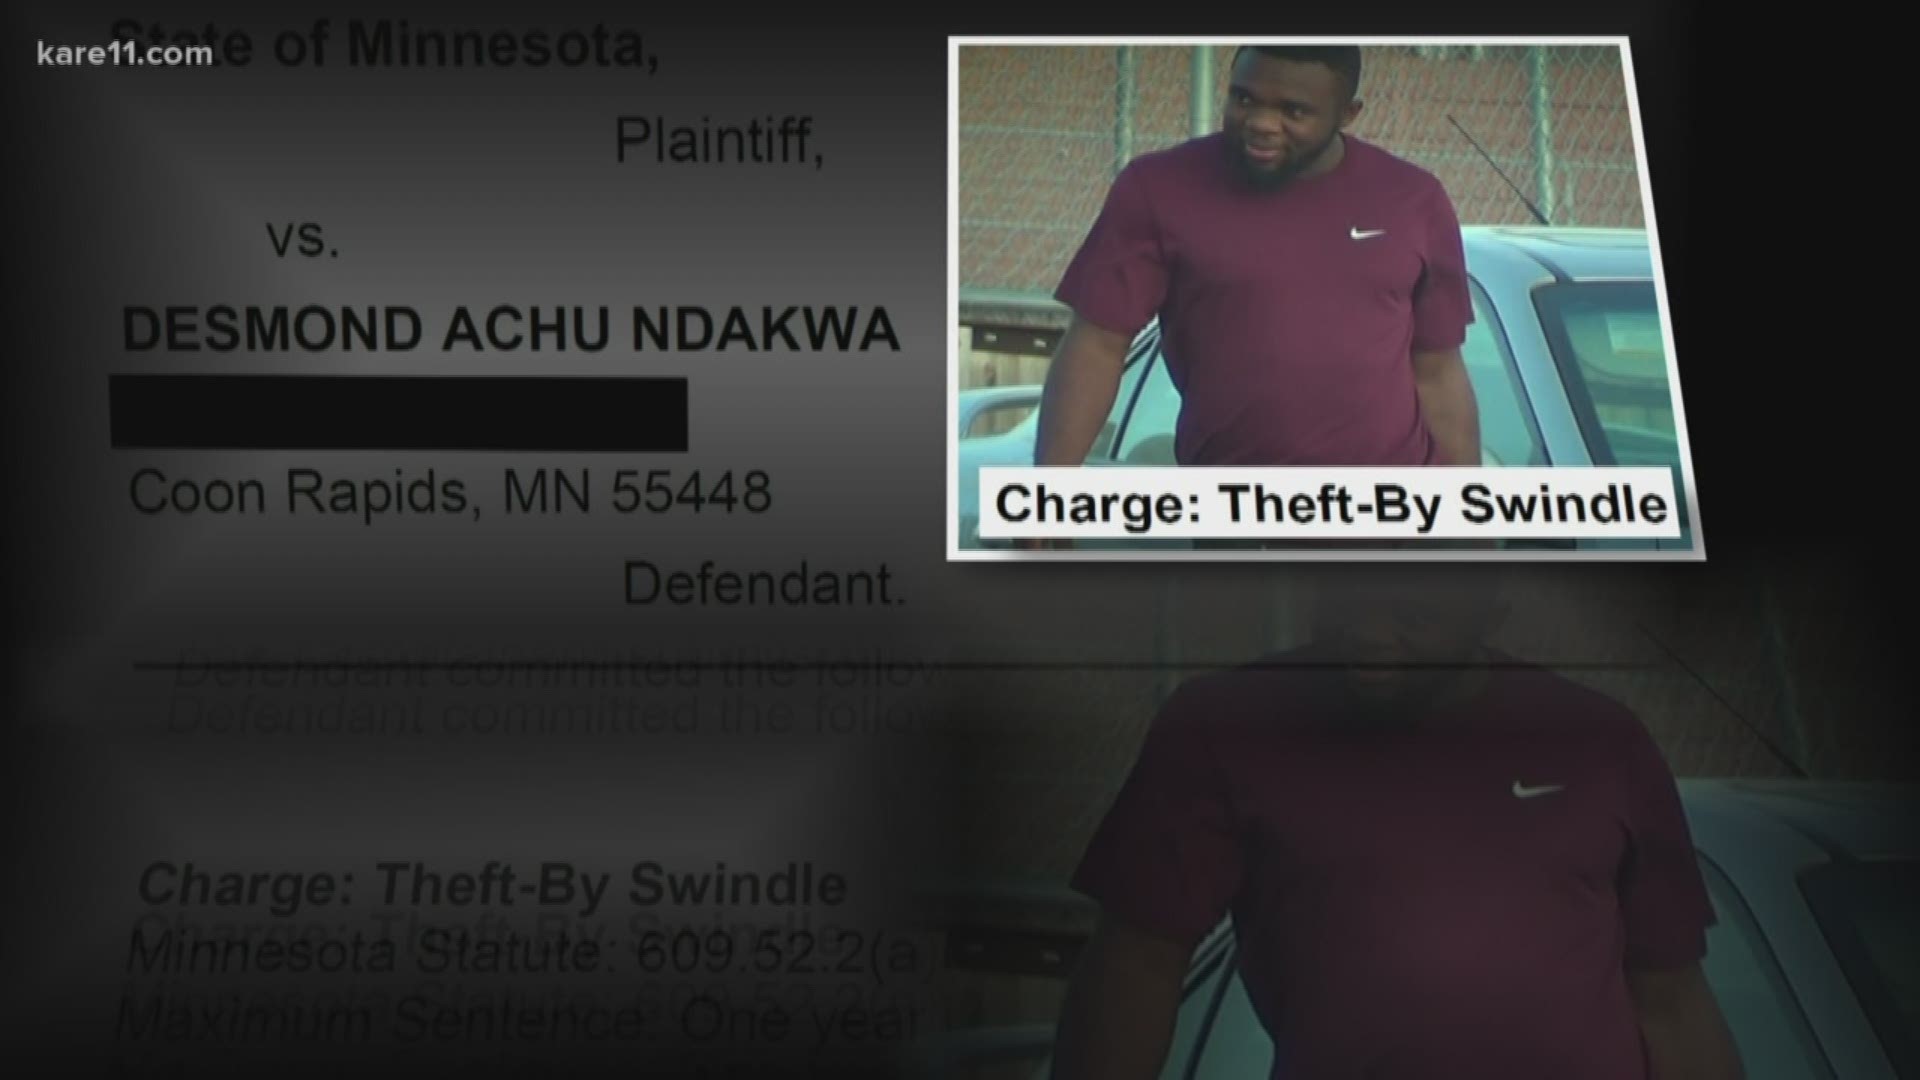 A Twin Cities man has been criminally charged after a KARE 11 investigation exposed a Minnesota connection to an international puppy scam ring.